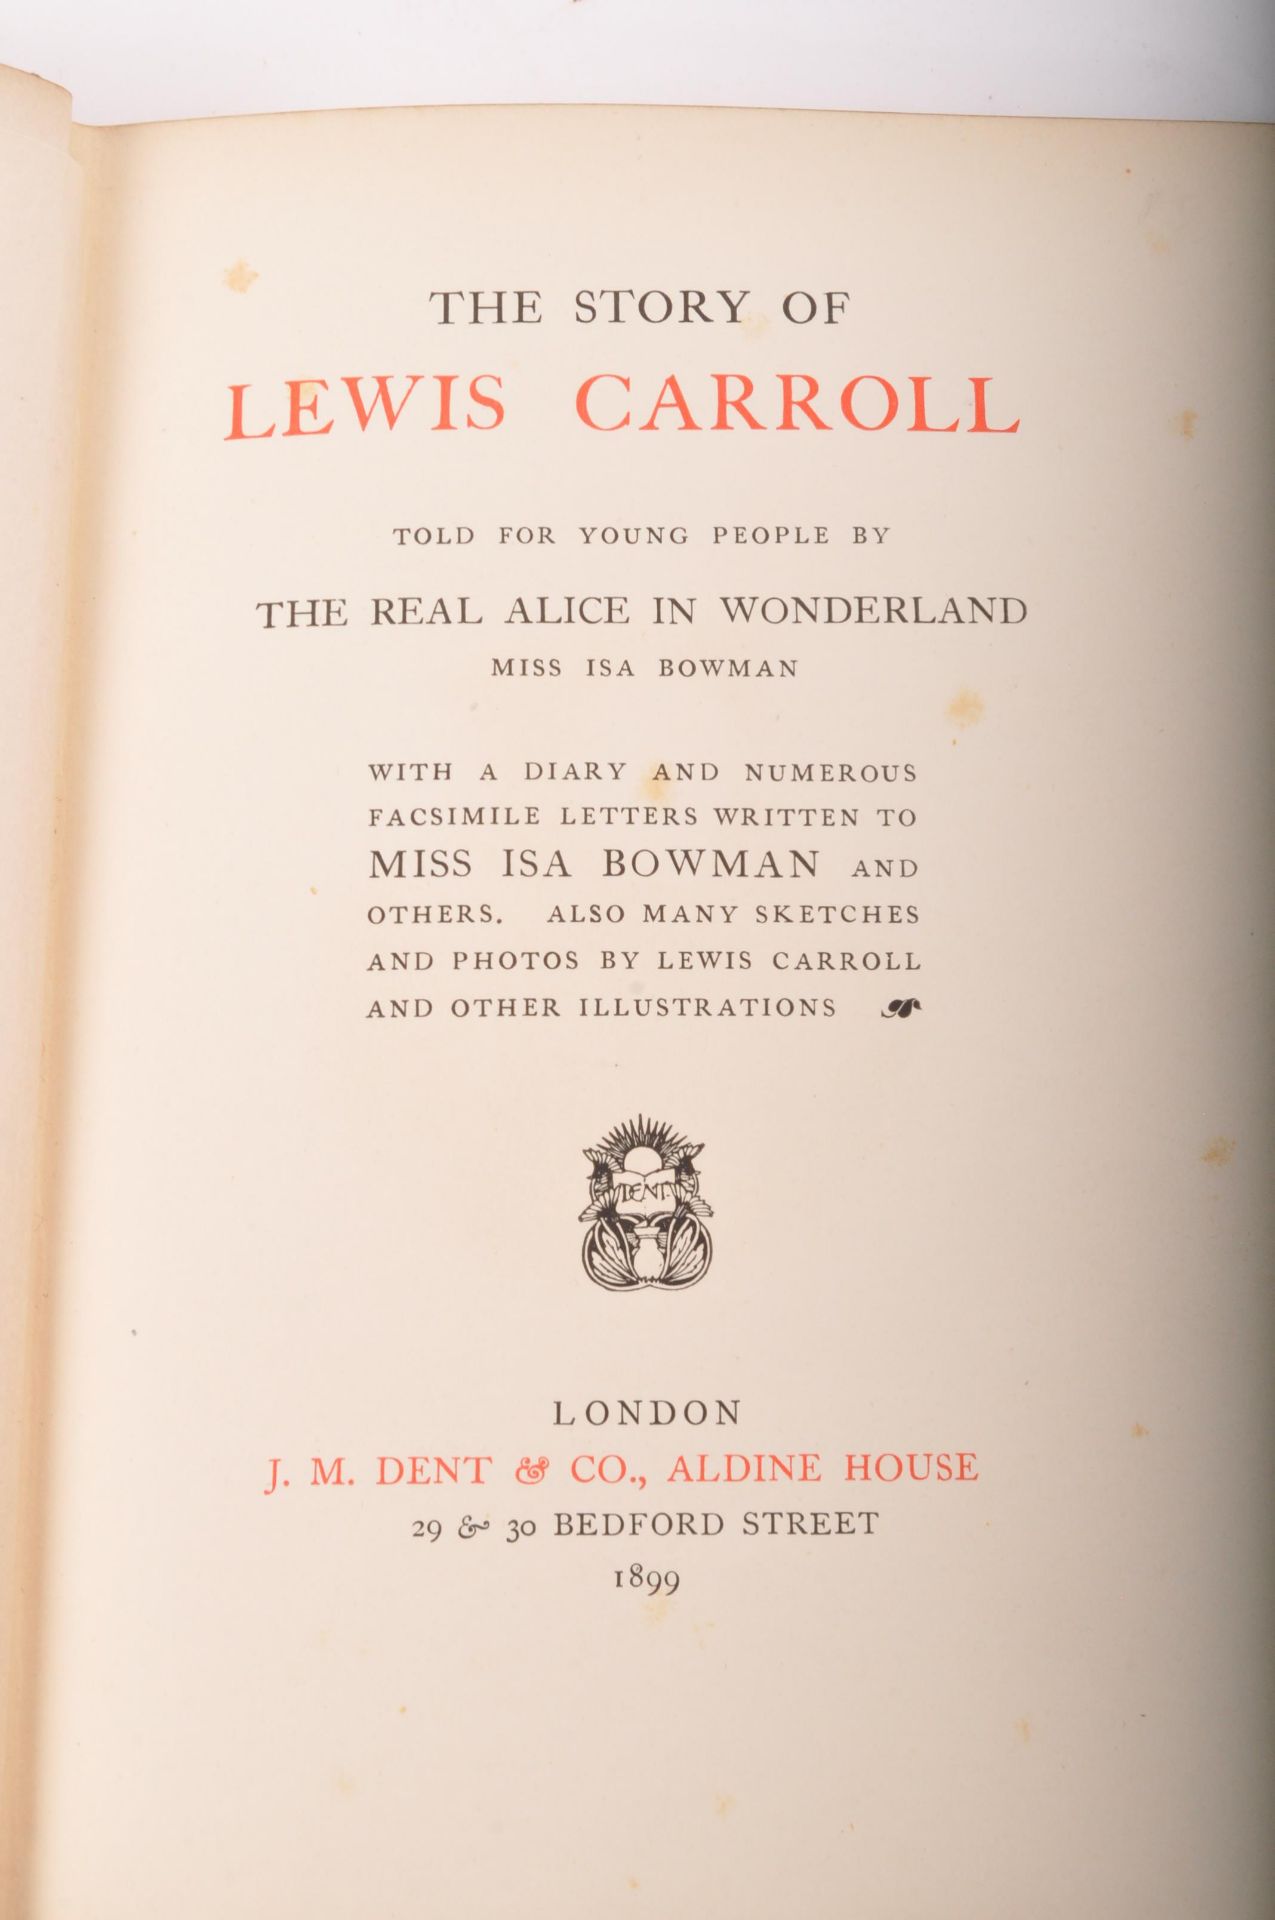 COLLECTION OF 20TH CENTURY LEWIS CARROLL BOOKS - Image 6 of 6